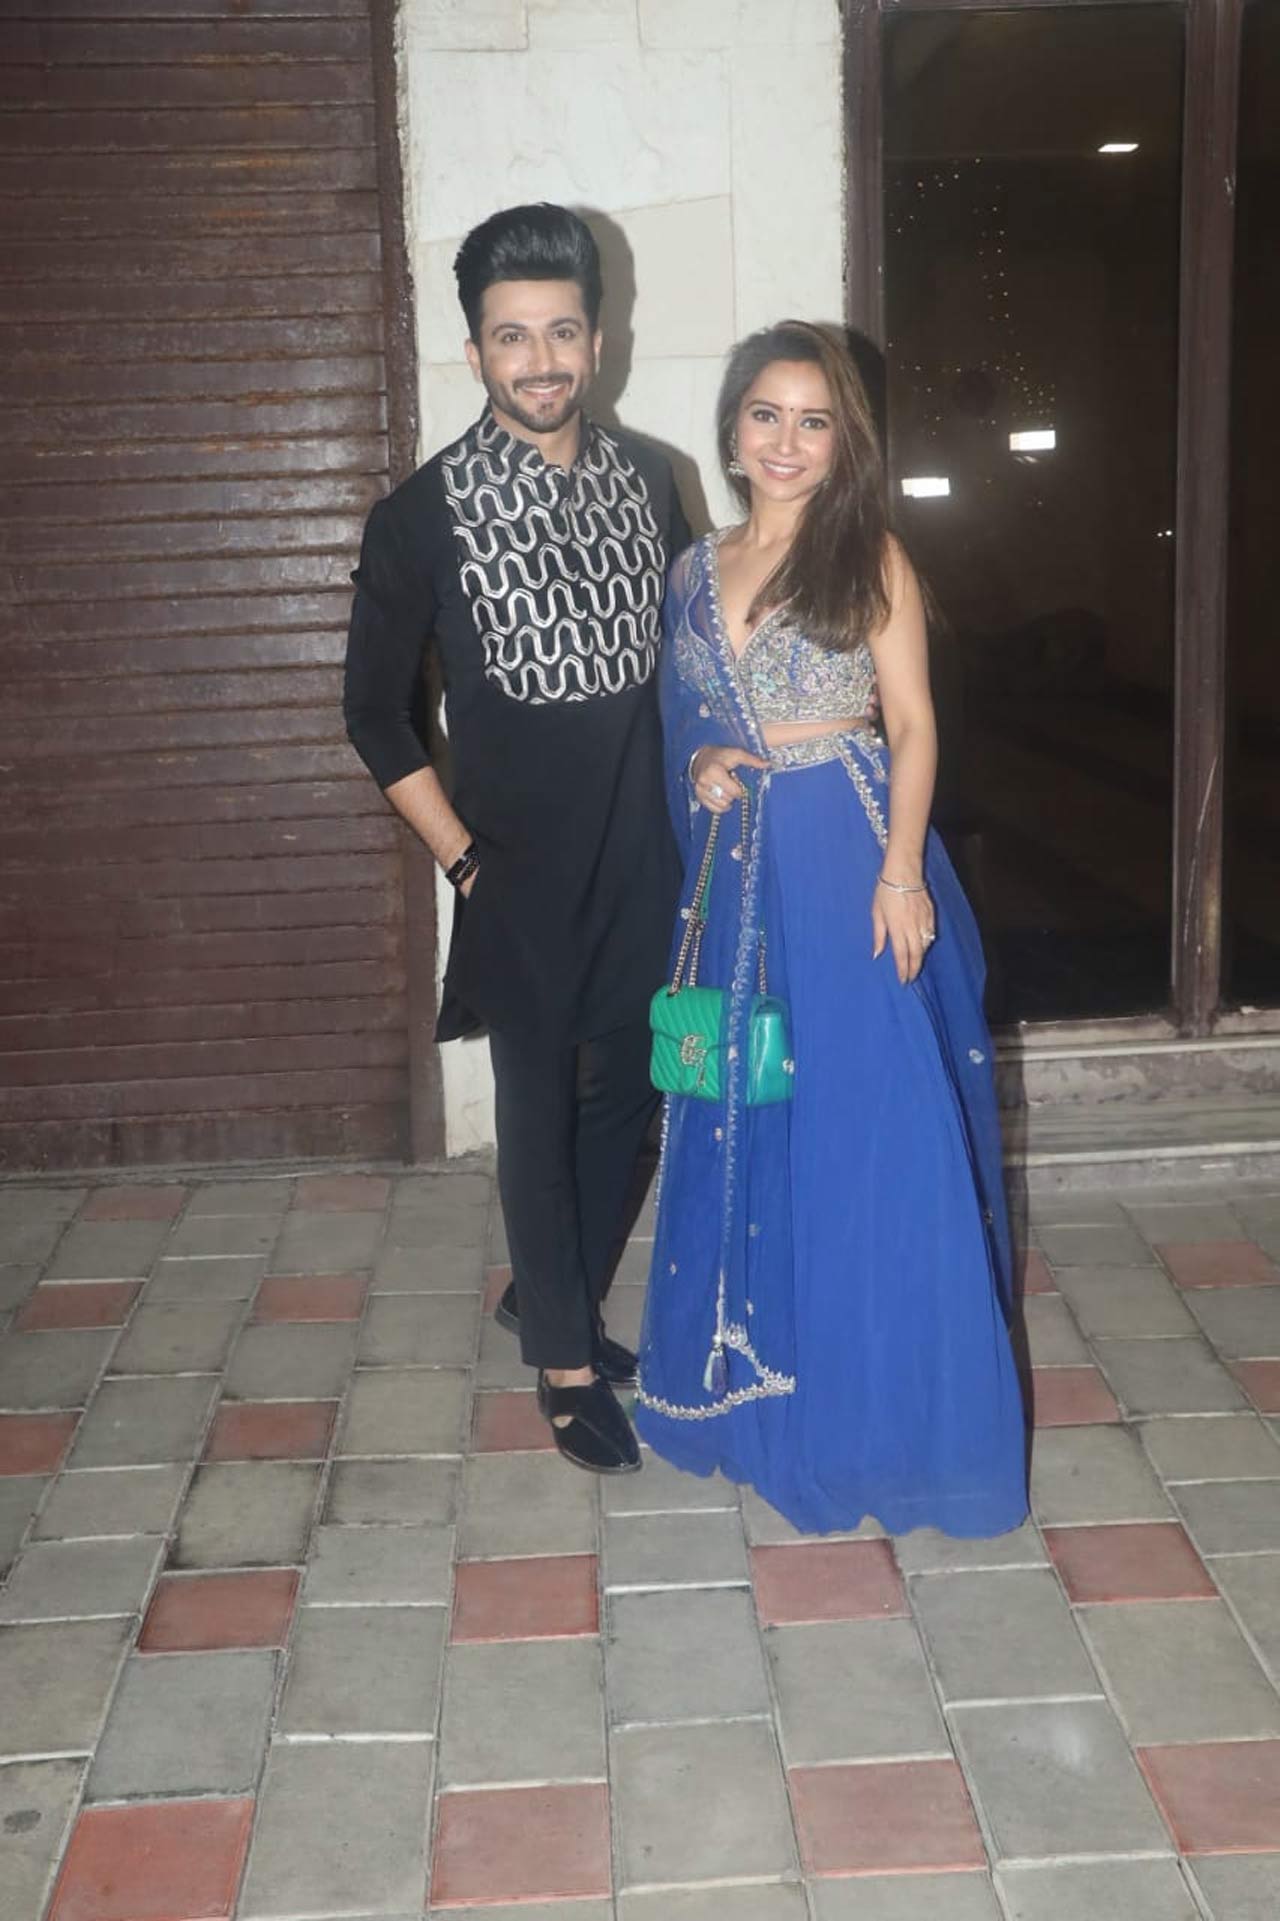 Popular TV couple Dheeraj Dhoopar along with wife Vinny Arora, posed for the shutterbugs as they arrived for the Diwali bash. While Dheeraj was seen donning a black kurta pyjama, Vinny upped the fashion game in a blue coloured lehenga.